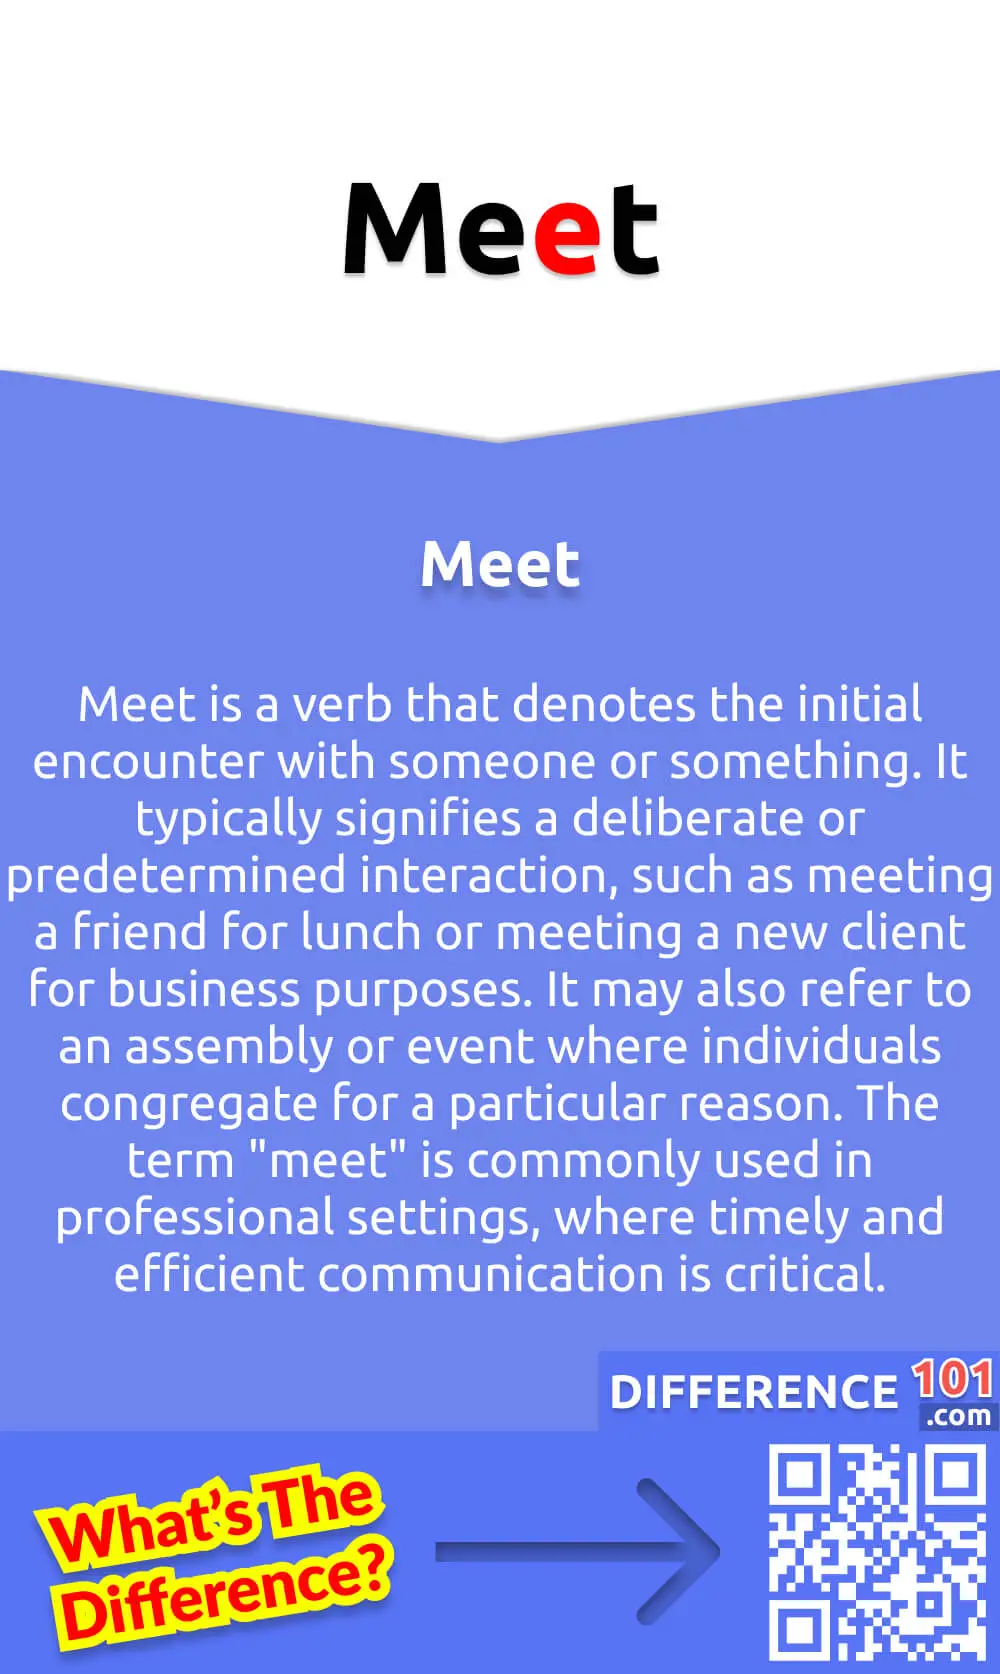 What Is Meet? Meet is a verb that denotes the initial encounter with someone or something. It typically signifies a deliberate or predetermined interaction, such as meeting a friend for lunch or meeting a new client for business purposes. It may also refer to an assembly or event where individuals congregate for a particular reason. The term "meet" is commonly used in professional settings, where timely and efficient communication is critical. It is important to be clear and concise when scheduling a meeting to ensure all parties involved are adequately prepared for the interaction. Effective meetings can lead to successful collaborations, improved relationships, and increased productivity.
